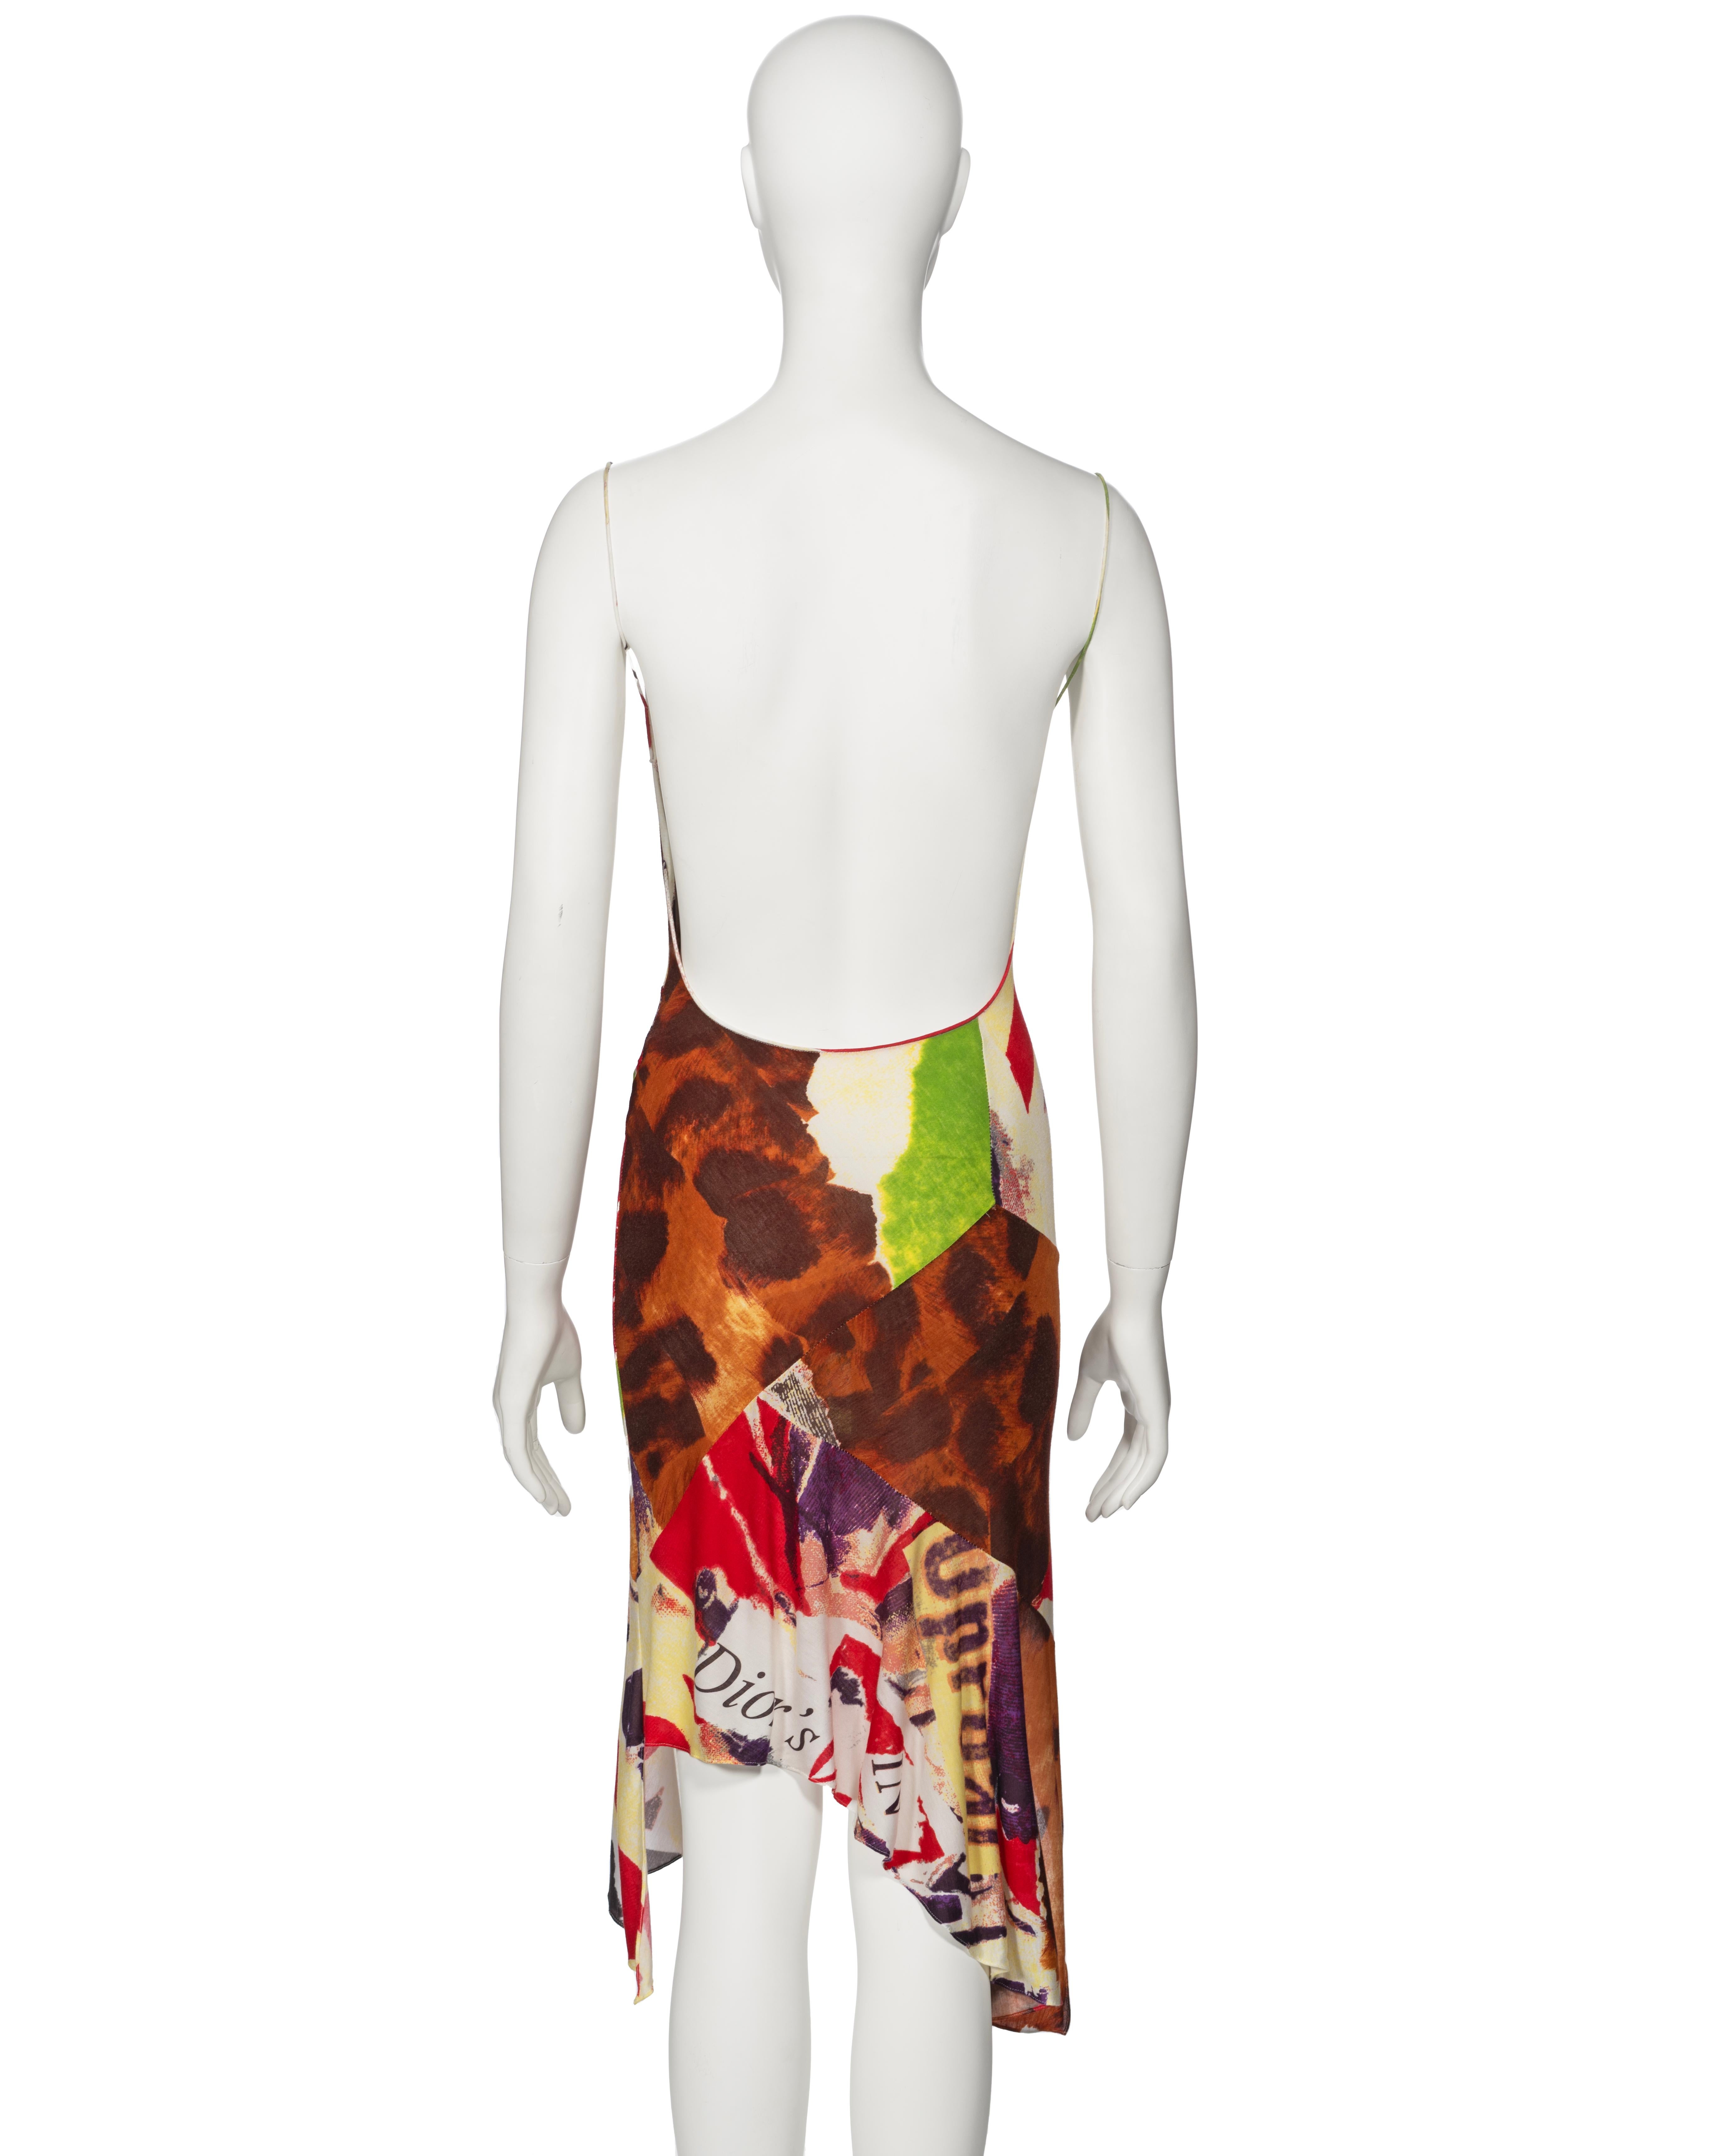 Christian Dior by John Galliano Montage Print Silk Jersey Dress, ss 2003 For Sale 3